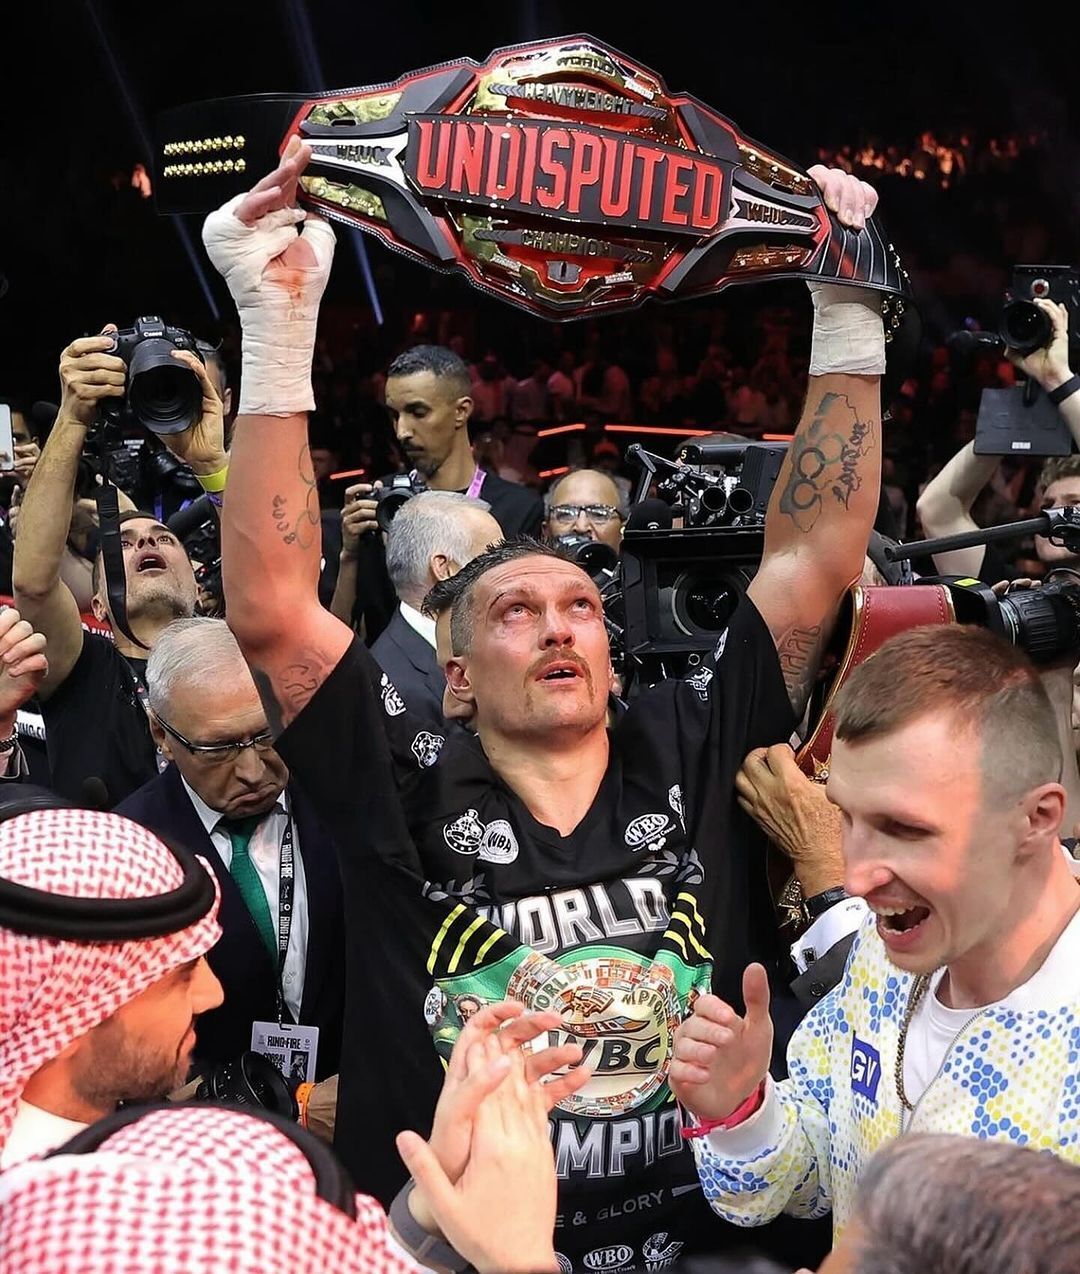 Official: the date of the rematch between Usyk and Fury has been announced